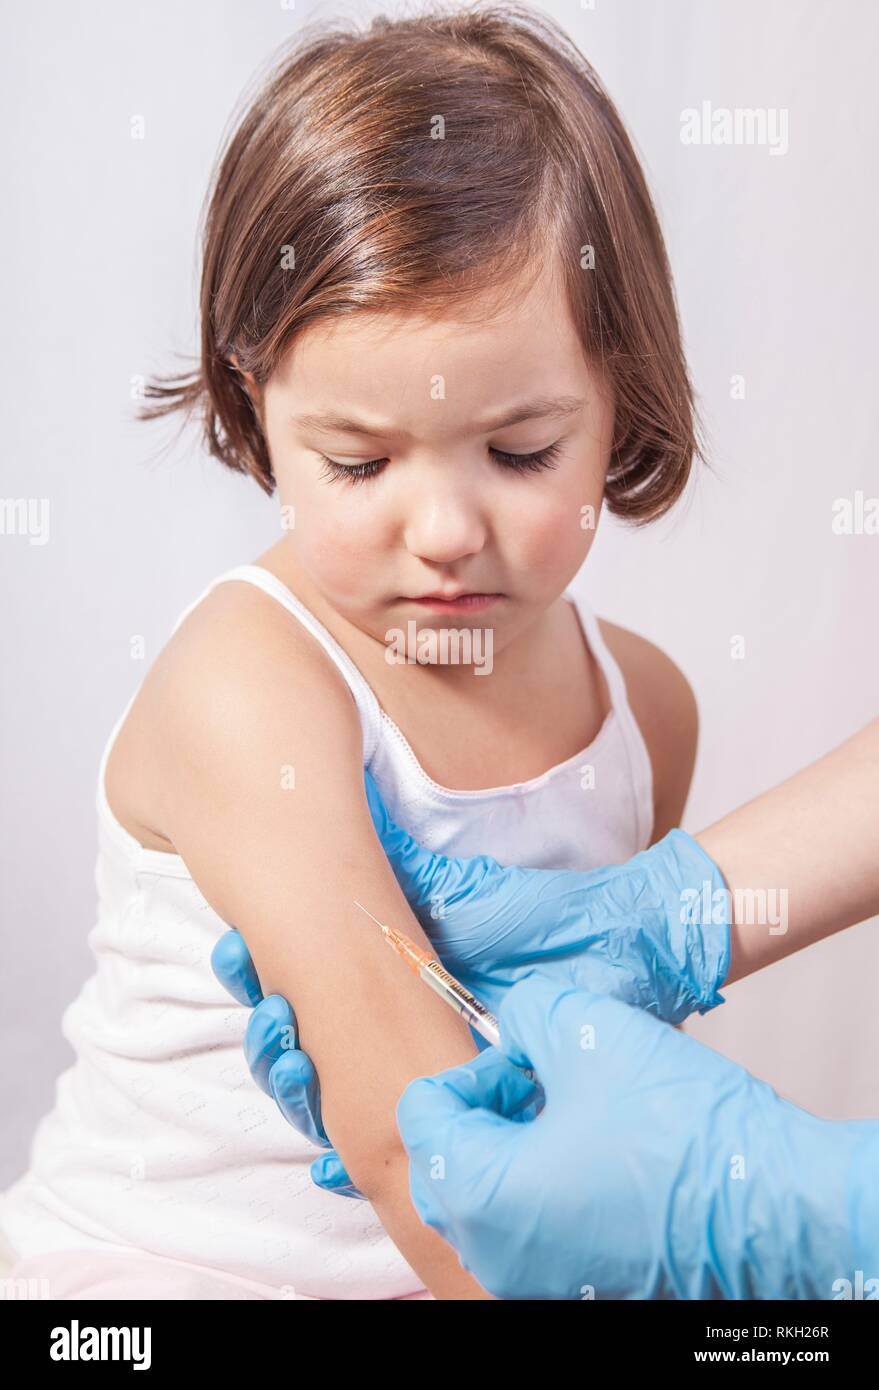 Nurse vaccinating 3 years old little girl. She is worry about painful stitch. Stock Photo